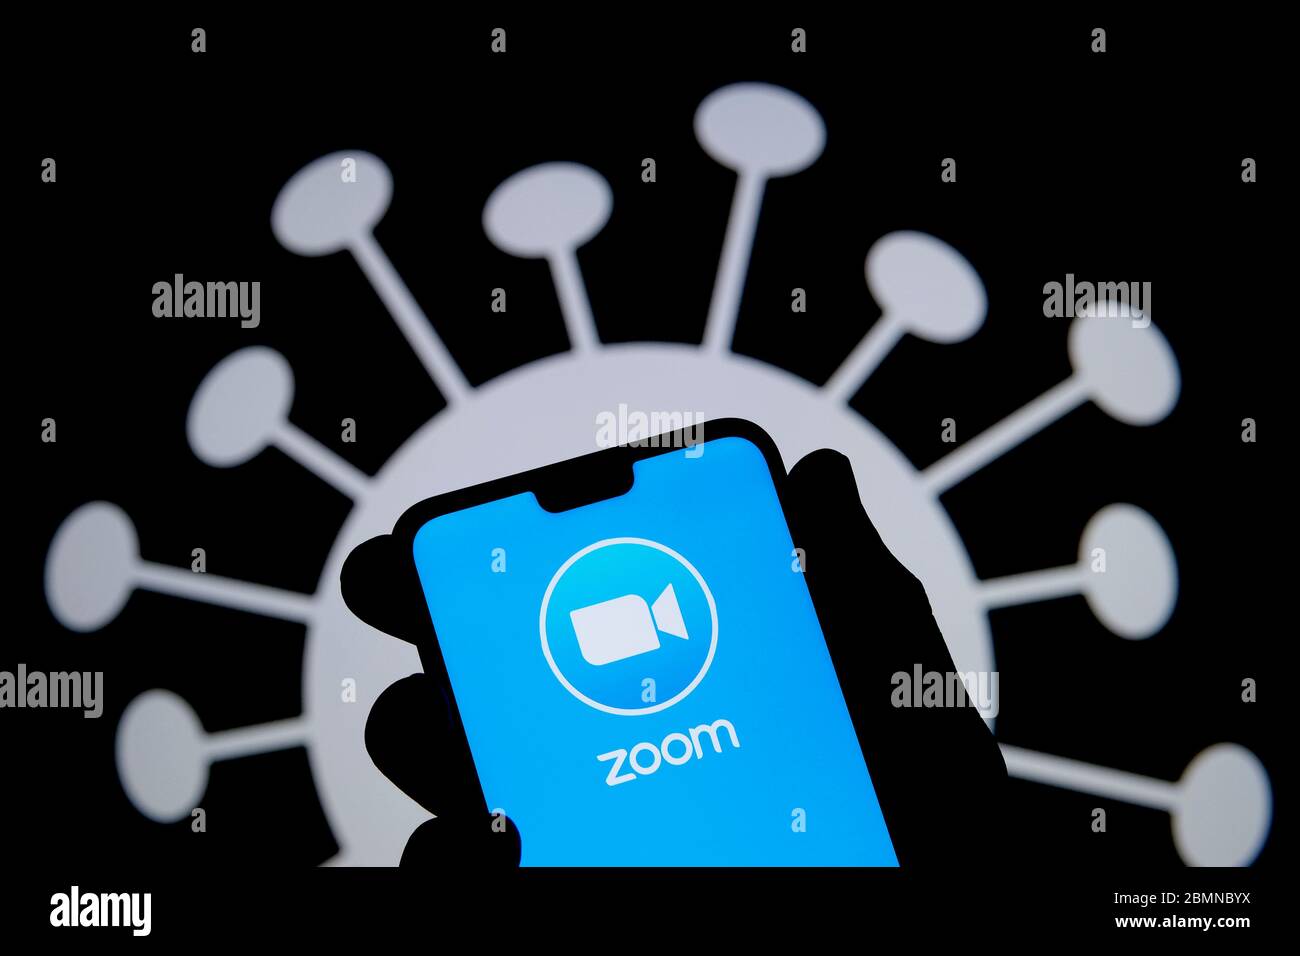 Stone / United Kingdom - May 10 2020: Zoom app logo on a smartphone silhouette hold in hand. Coronavirus image on the blurred background. Real photo, Stock Photo